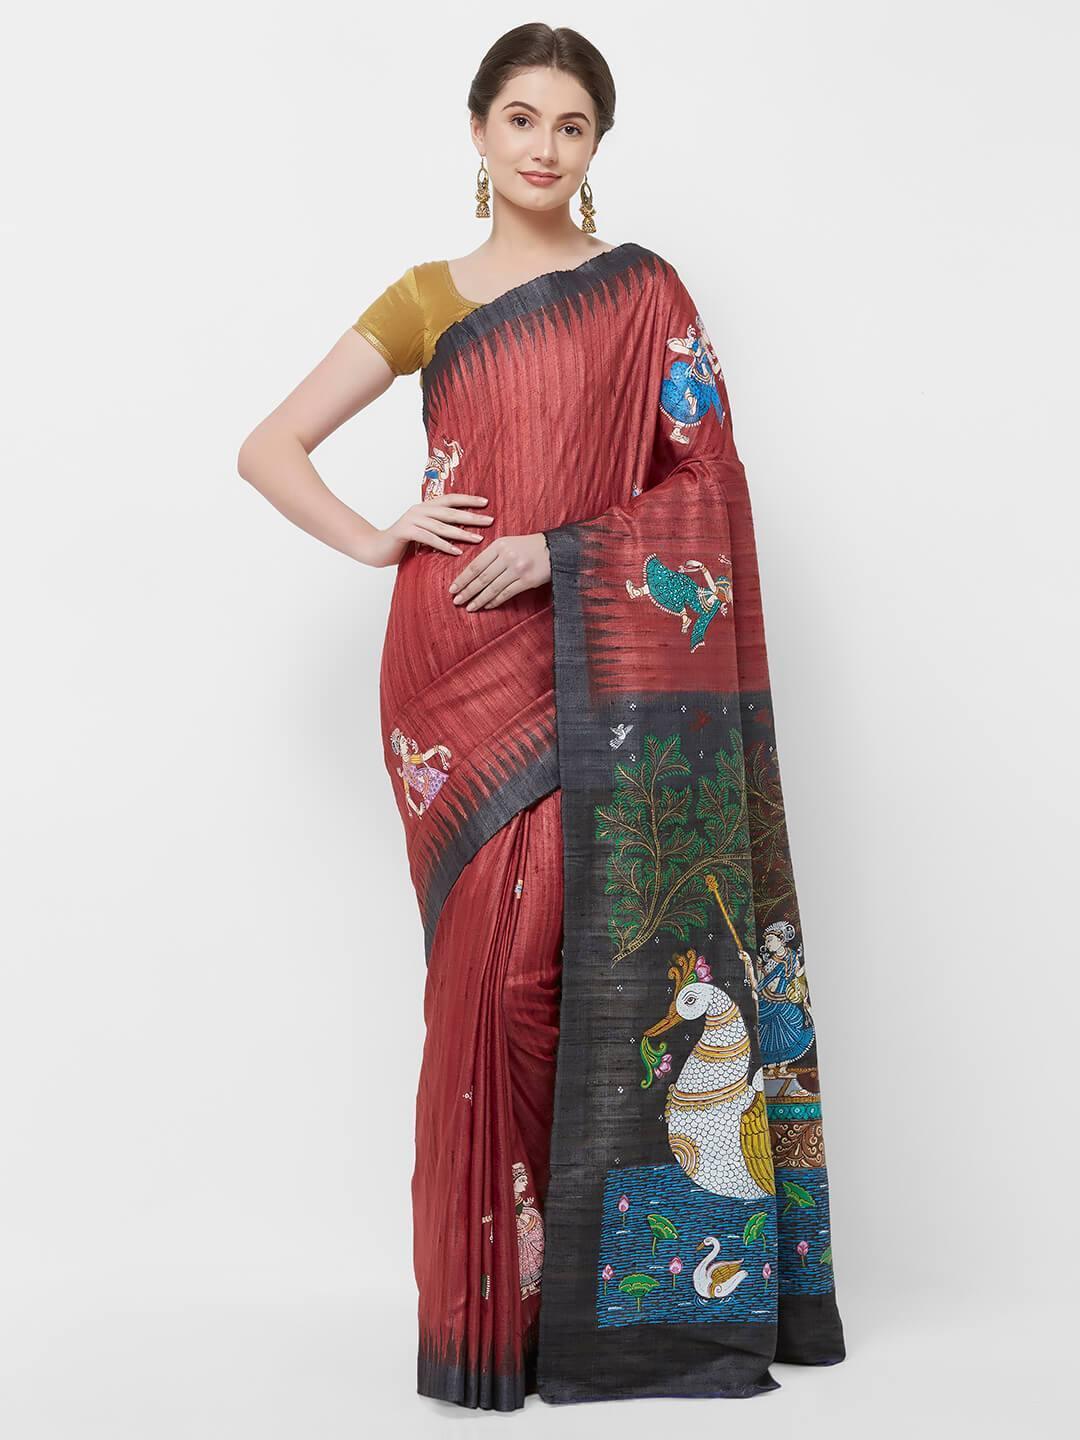 CraftsCollection.in -Red Tussar Ghicha Silk with handpainted Pattachitra Motifs